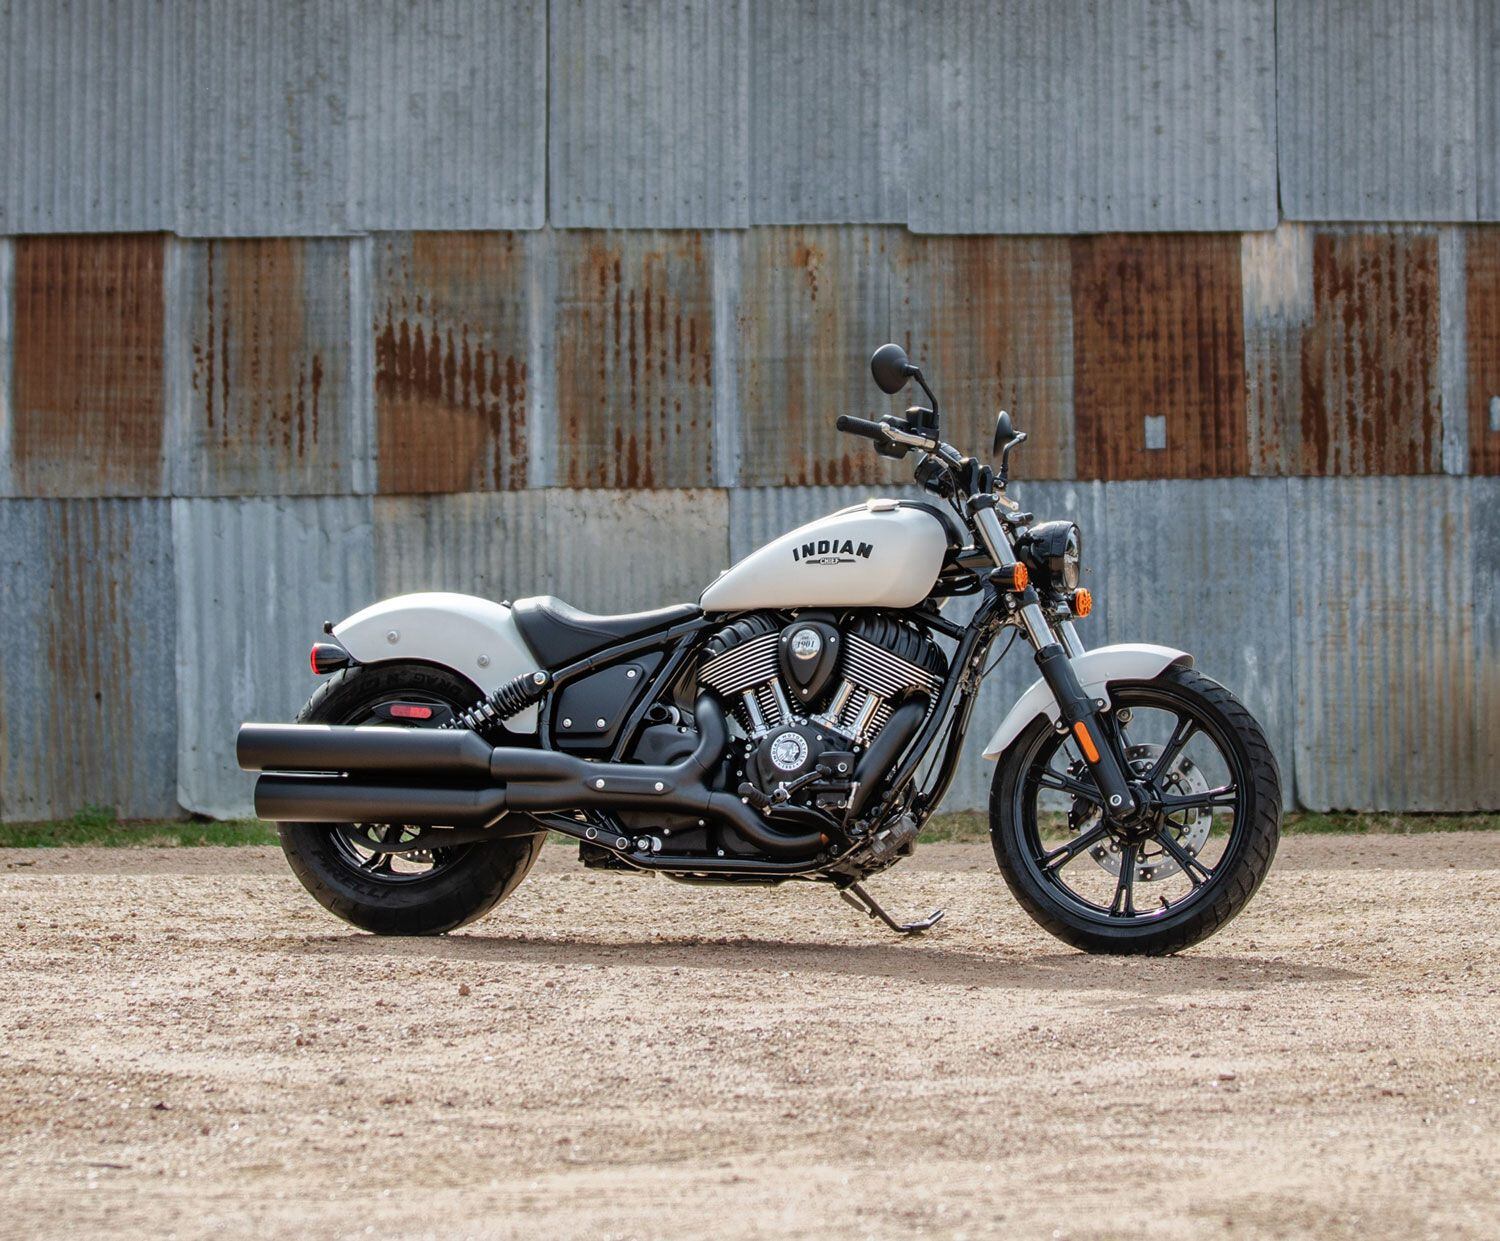 The 2022 Indian Chief in White Smoke with a front 19-inch cast wheel.